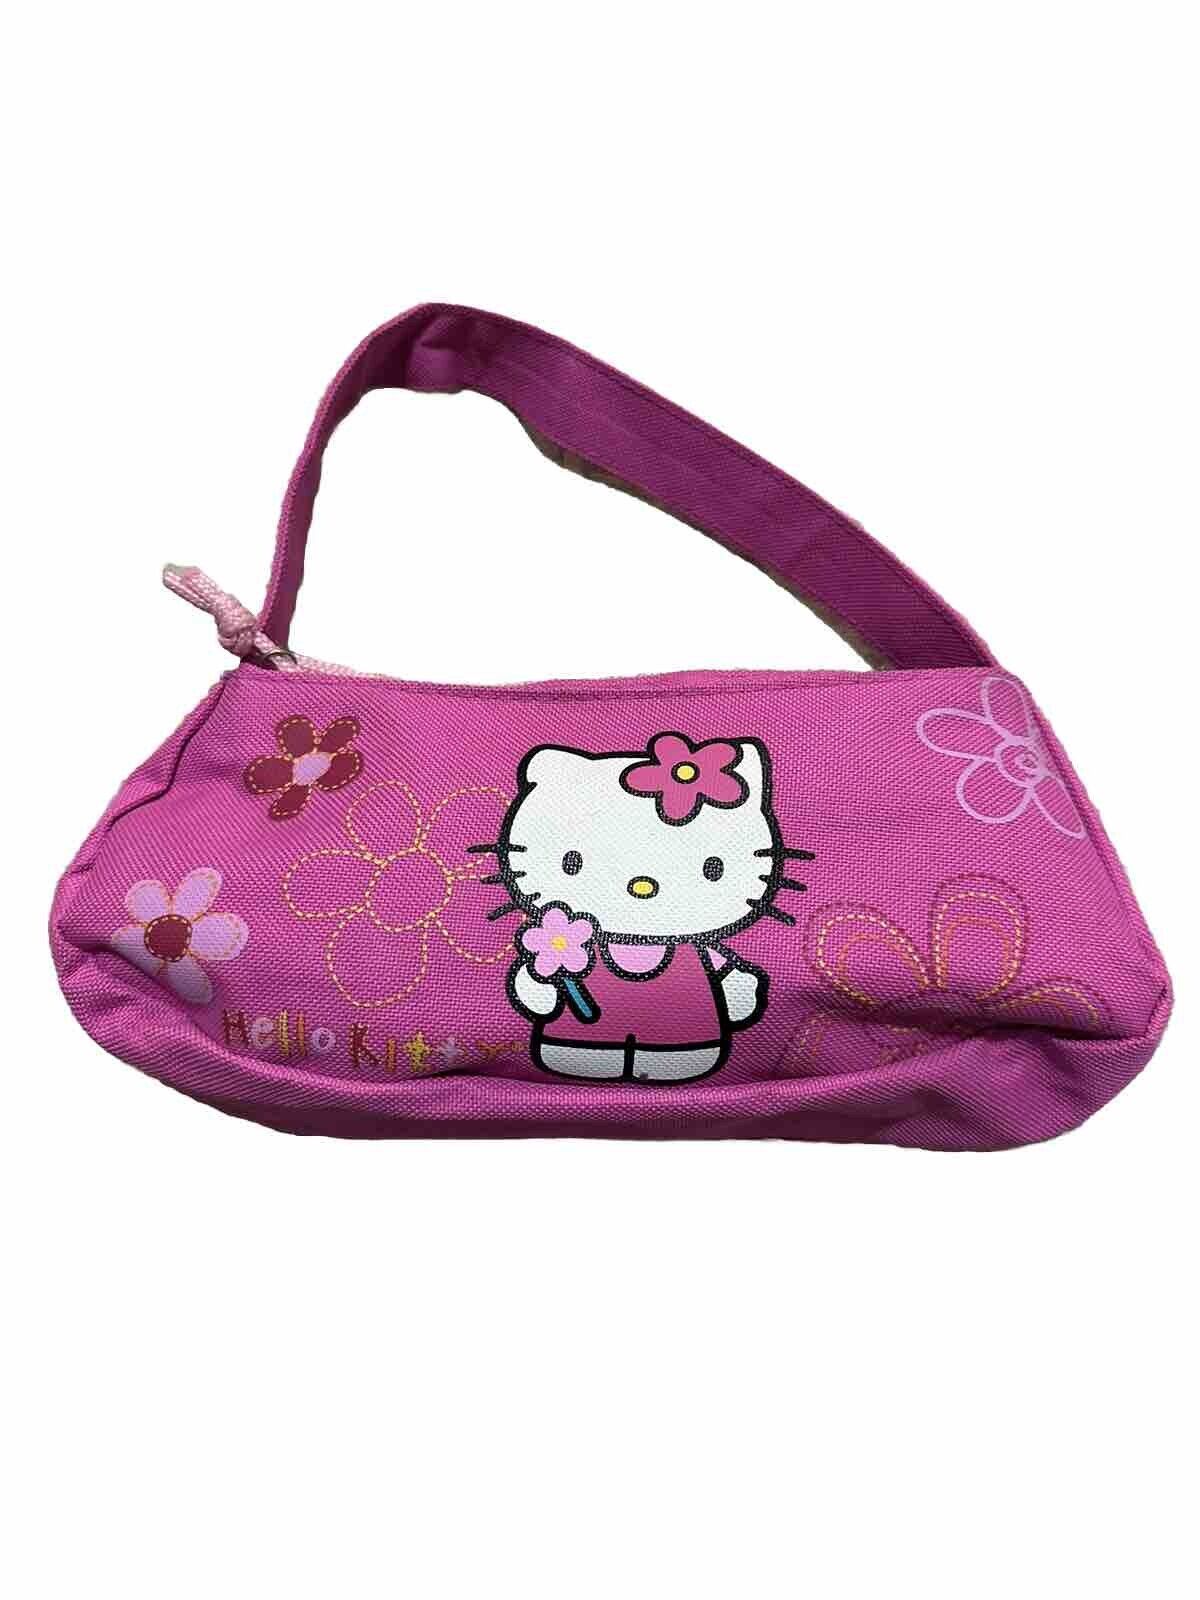 Hello Kitty Mini Purse Flowers VTG Y2K Pink Sanrio 2007 Authentic Floral Zip